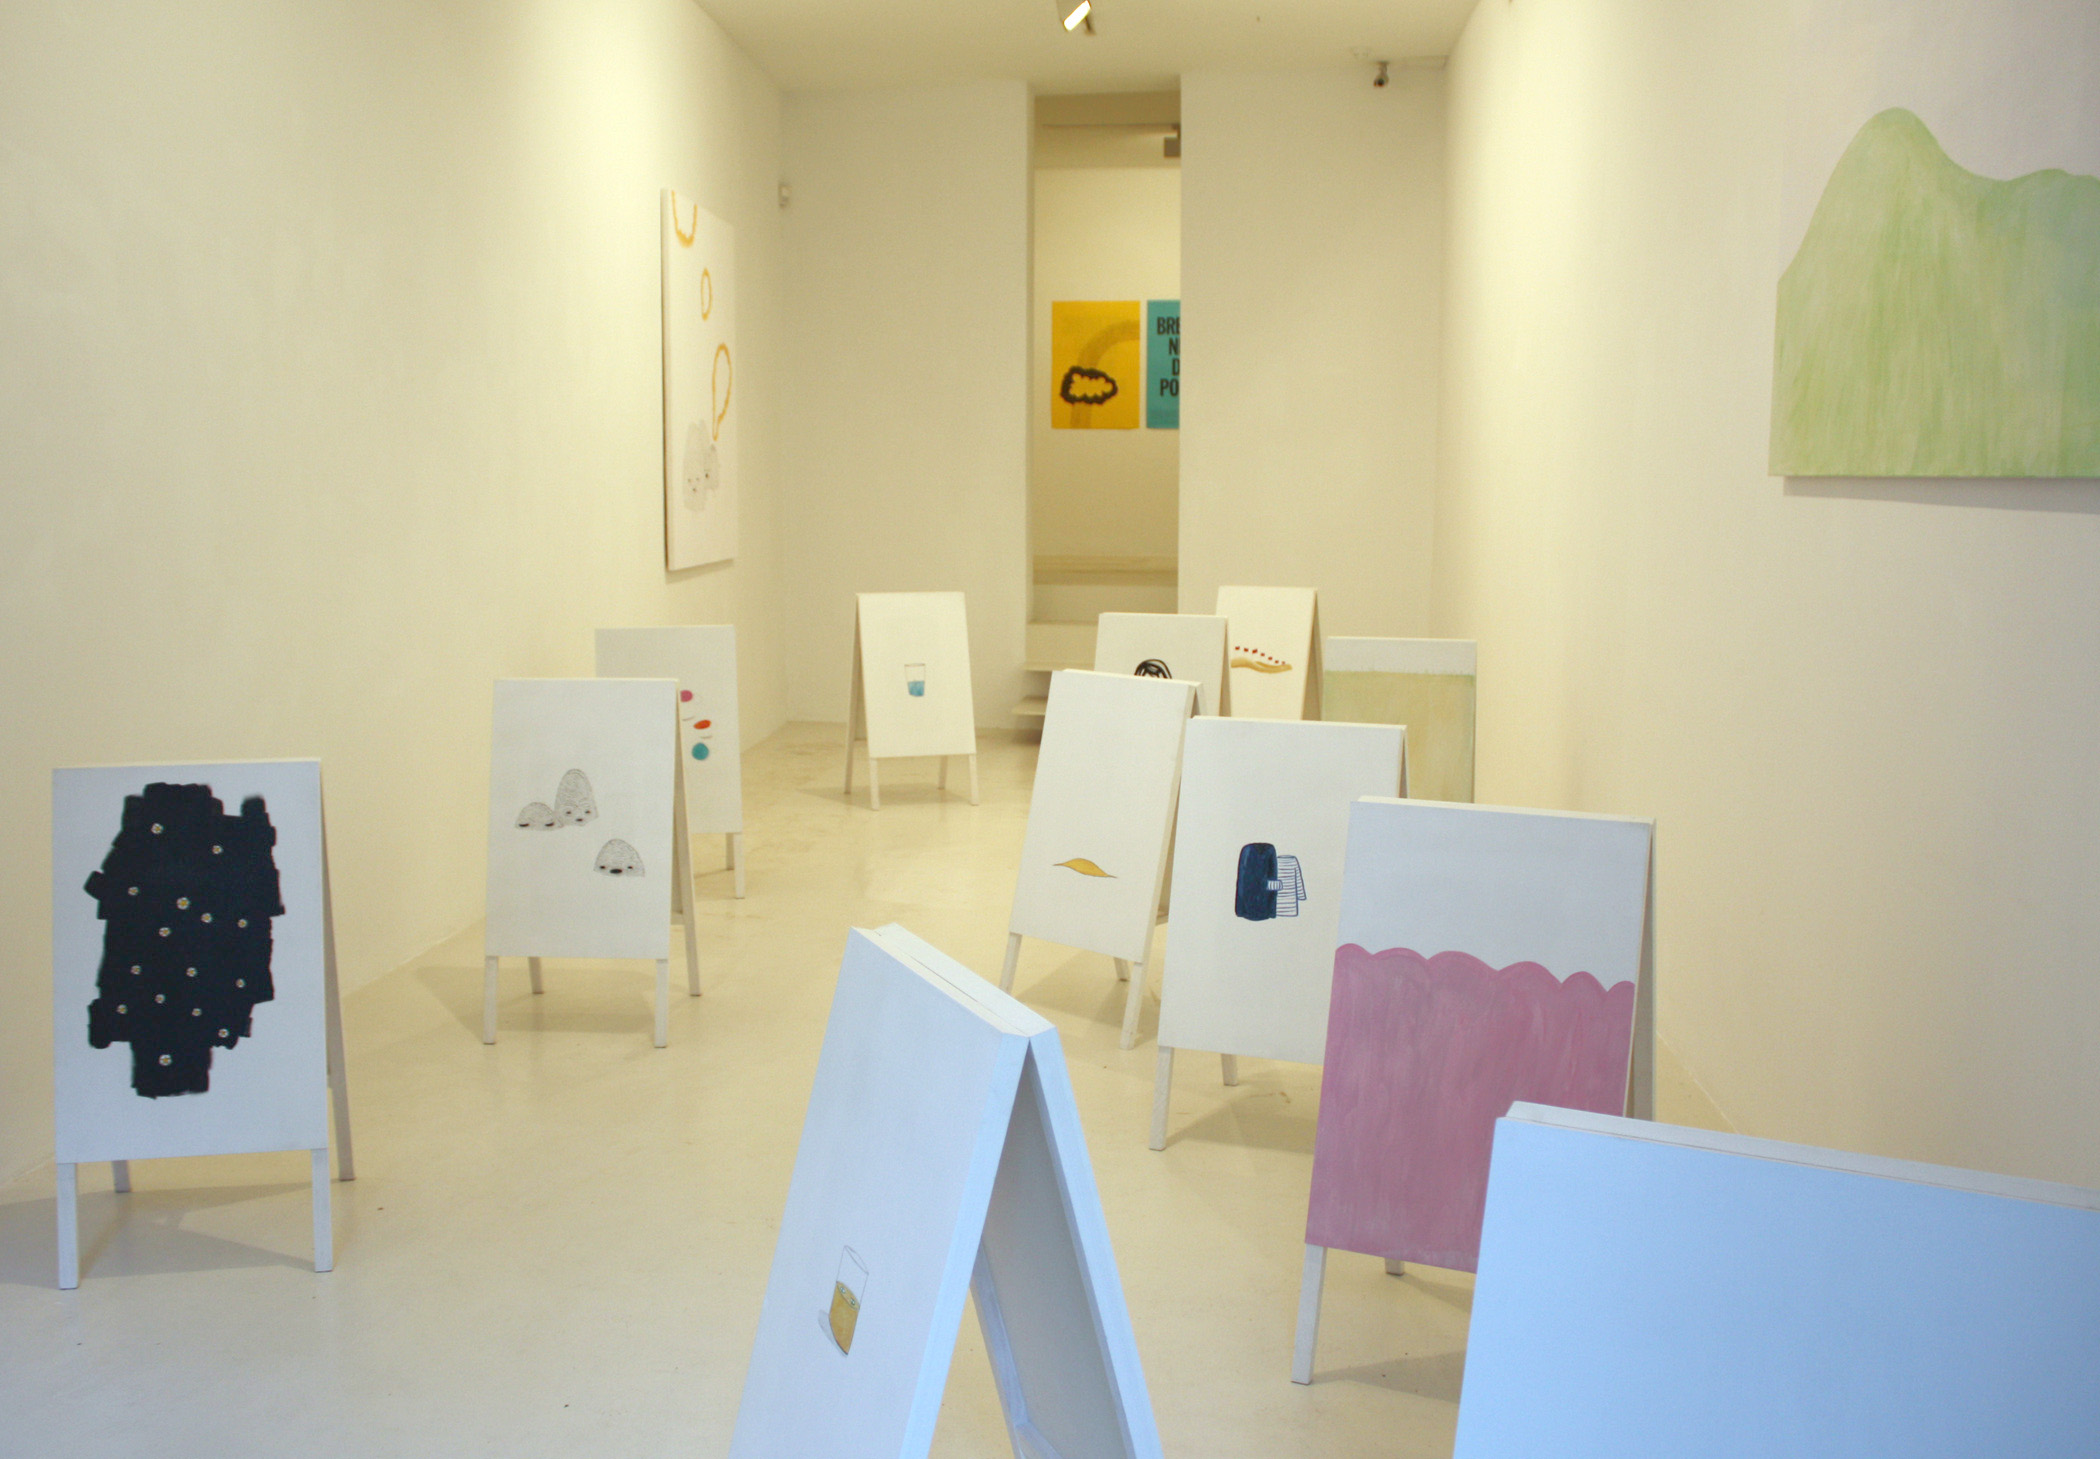 Exhibition view in the Galería Maior of Palma, 2011